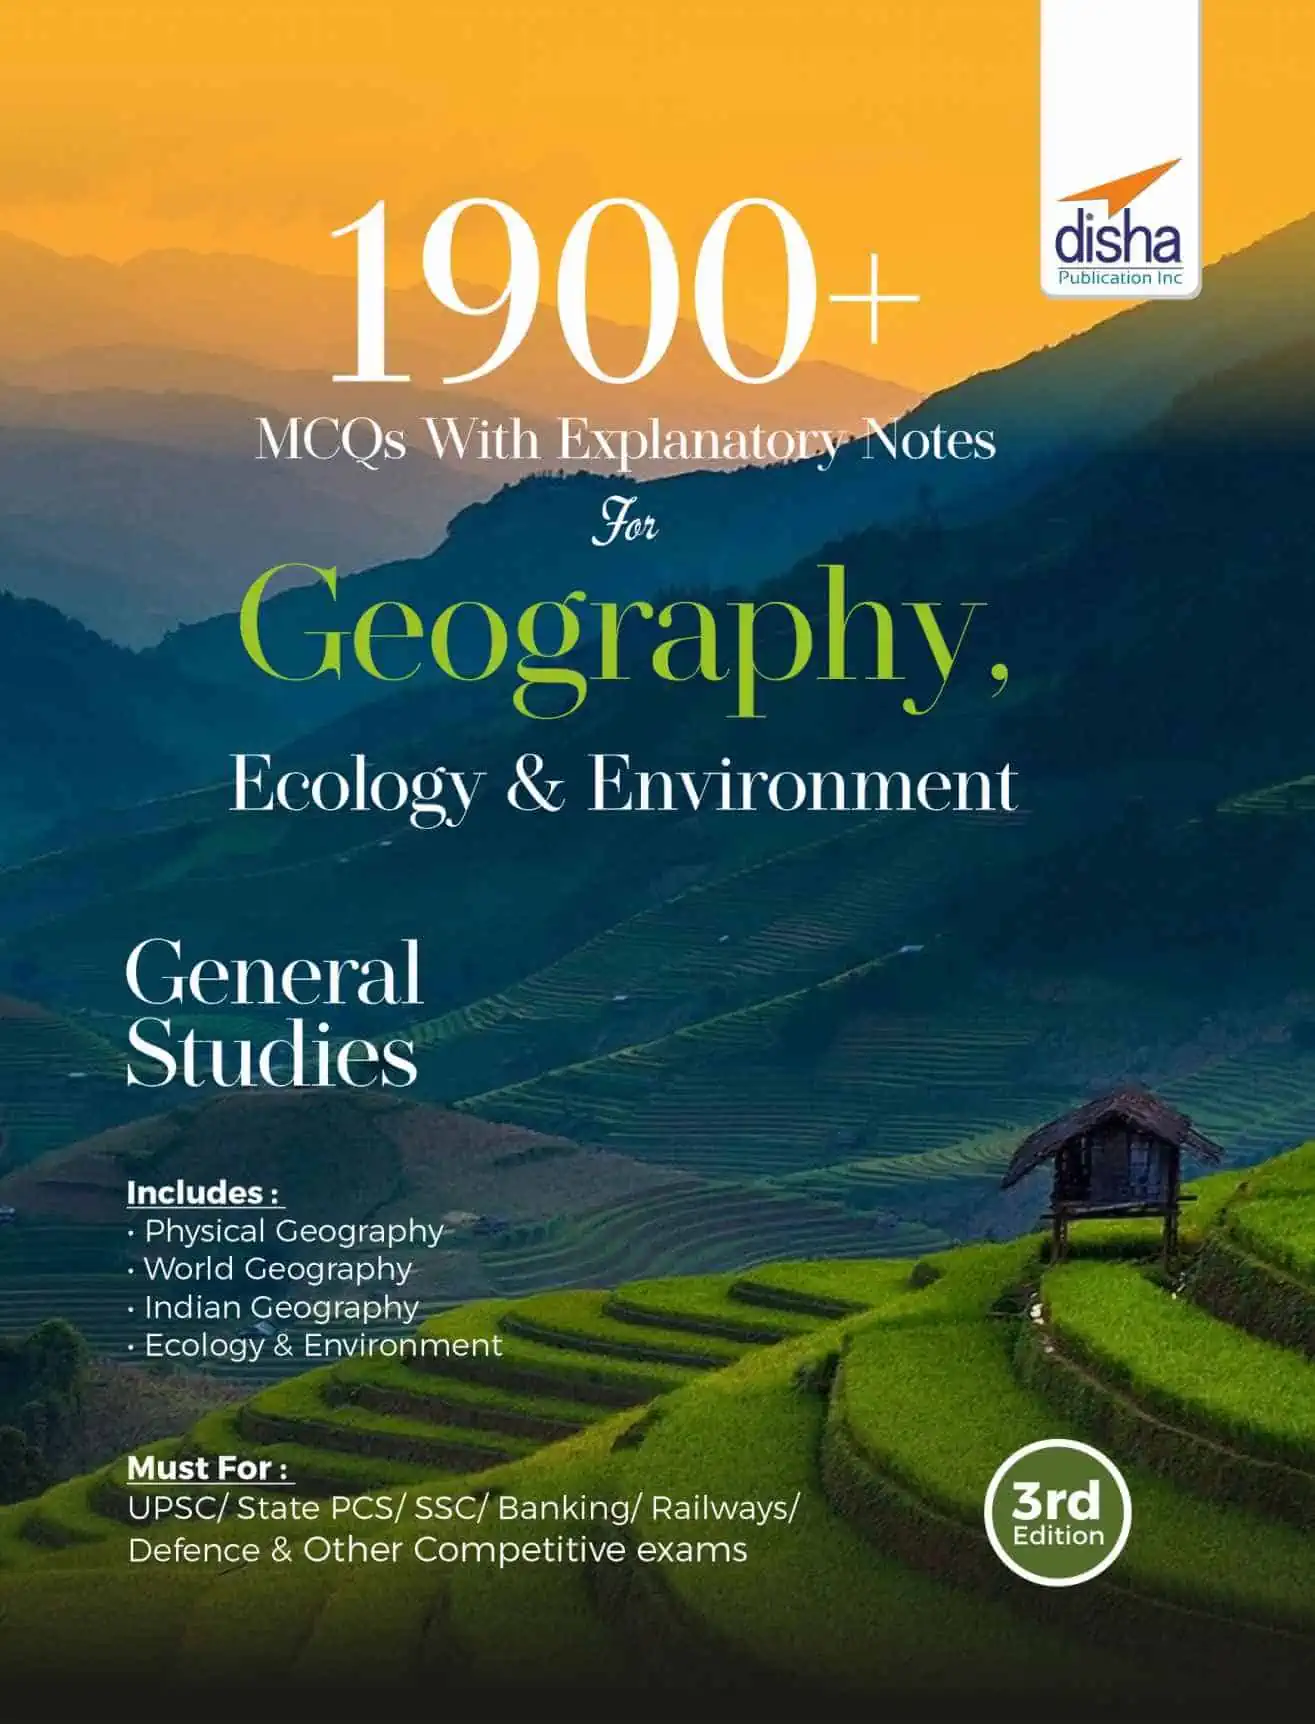 1900+ MCQs with Explanatory Notes for Geography, Ecology & Environment PDF